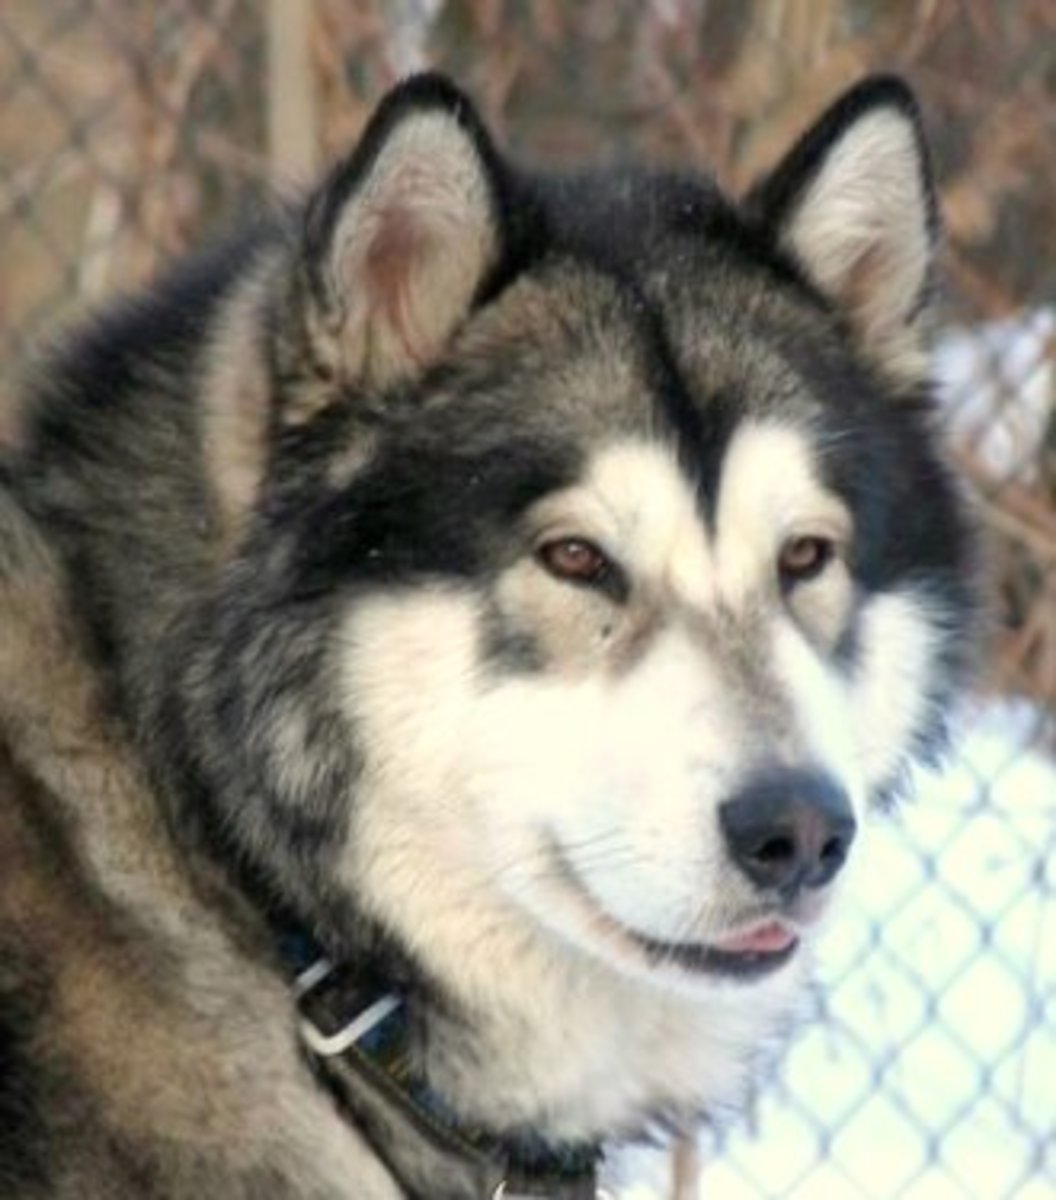 Malamutes are sociable and only bark when necessary. They're great dogs for families.